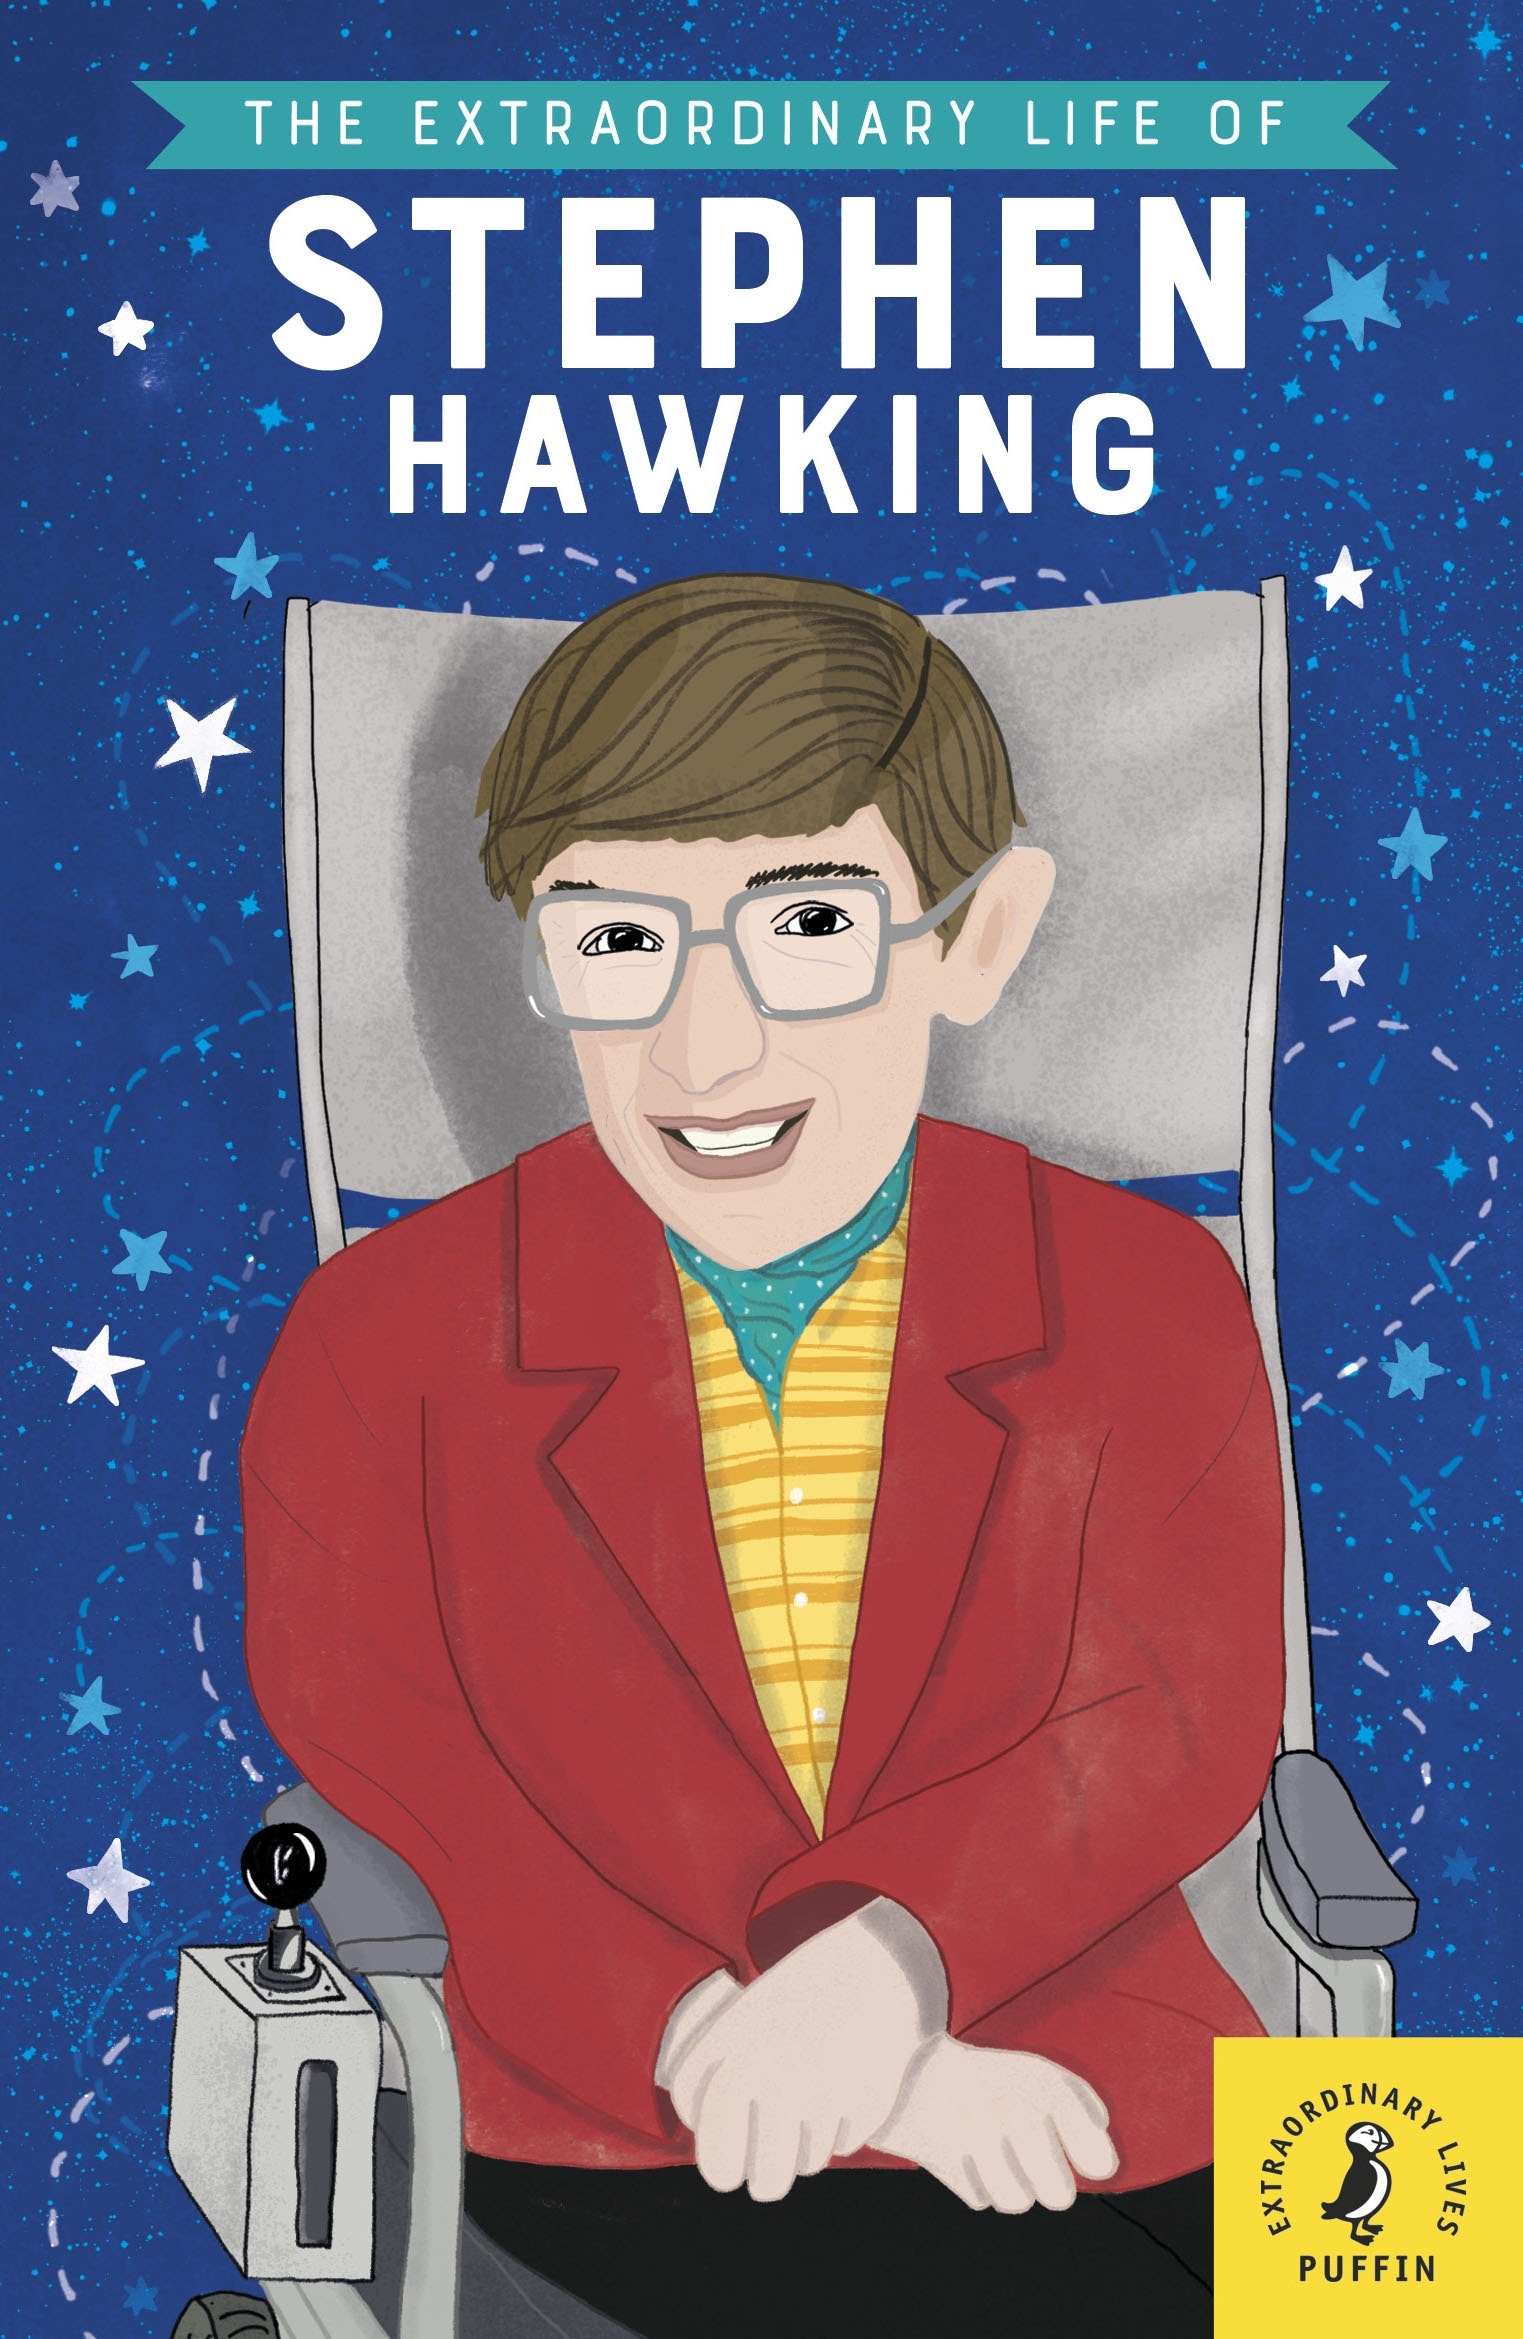 Book “The Extraordinary Life of Stephen Hawking” by Kate Scott, Esther Mols — January 10, 2019